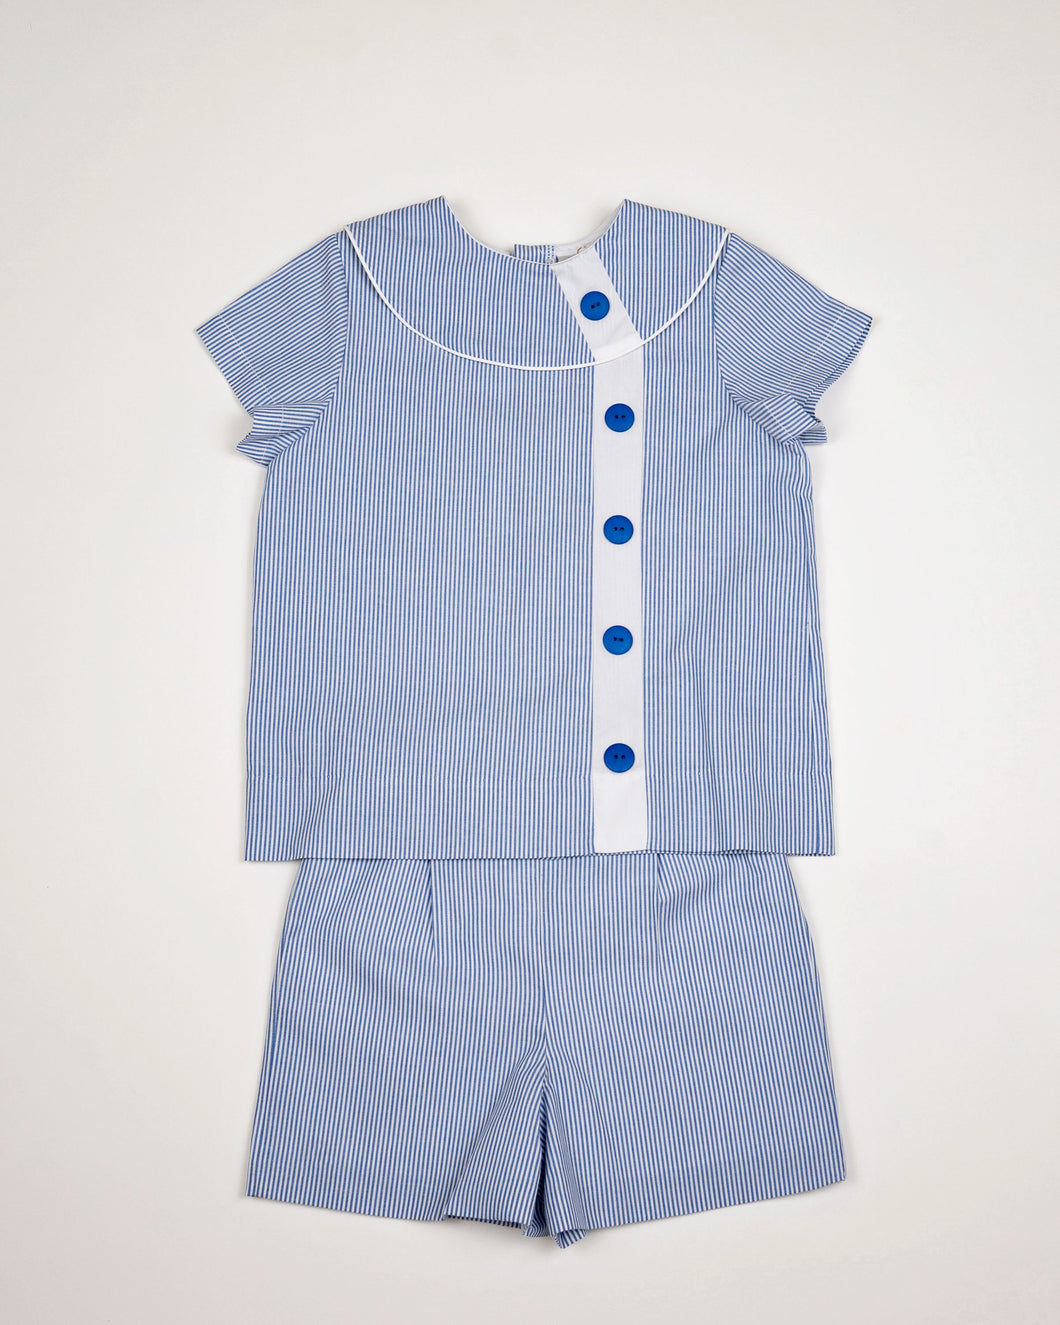 Little Boys Blue Striped Suit - Edward Overblouse Suit in Blue Stripe with White Insert